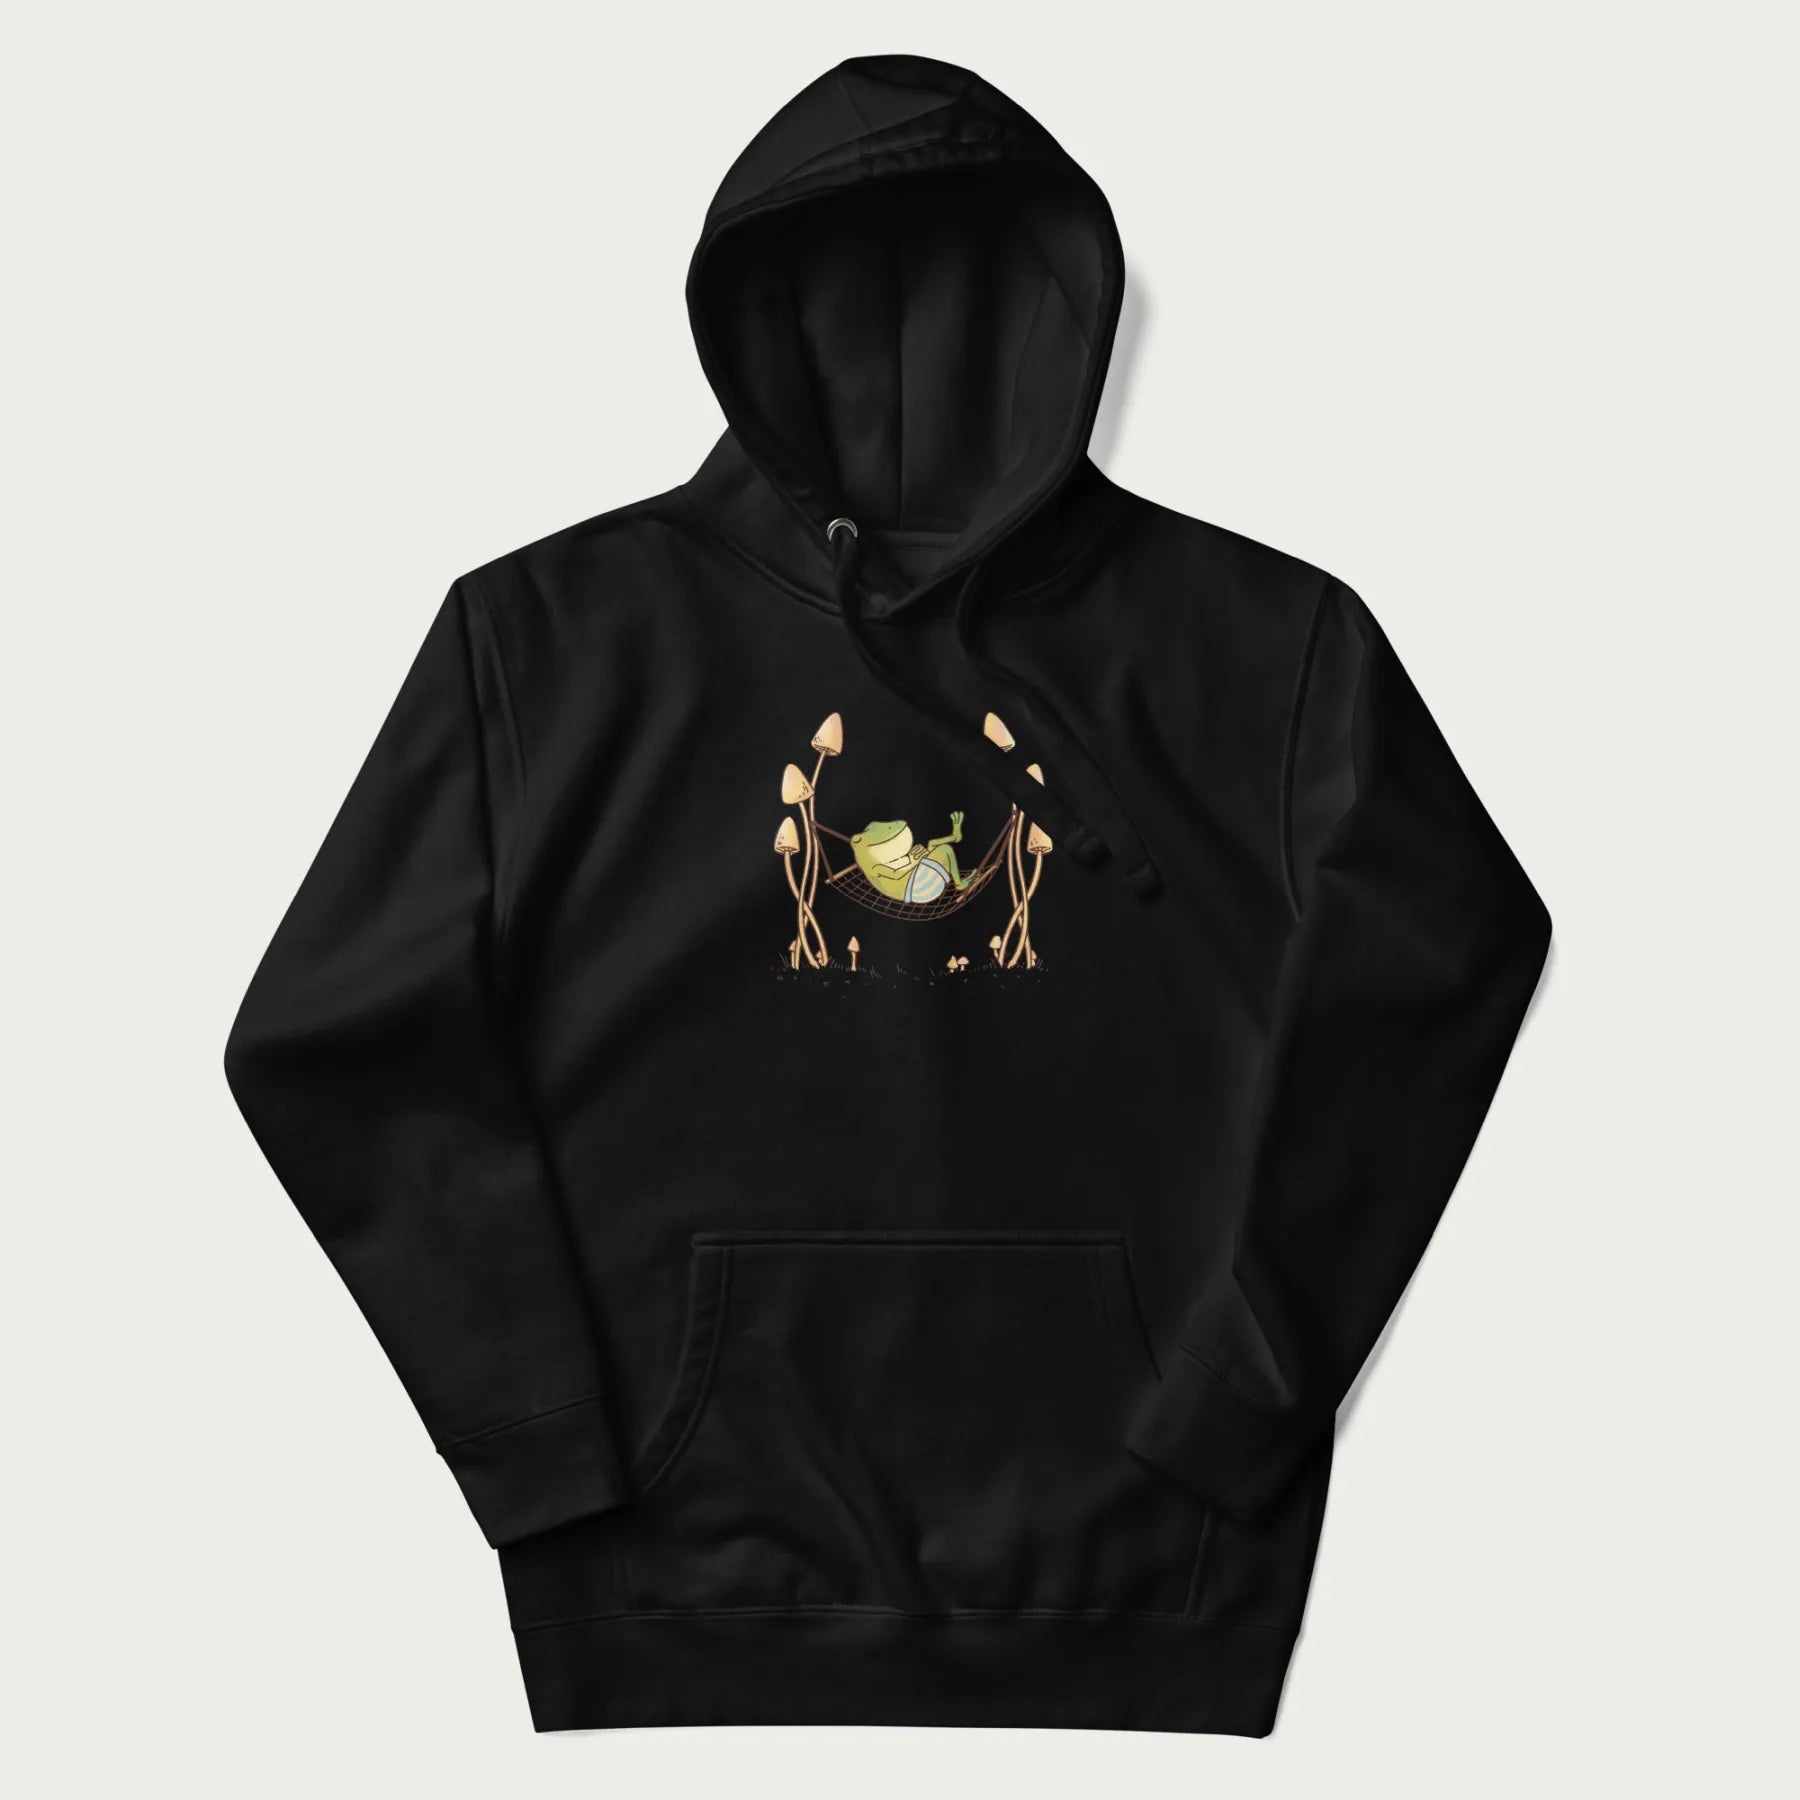 Black hoodie with a graphic of a frog lounging in a hammock between tall mushrooms.